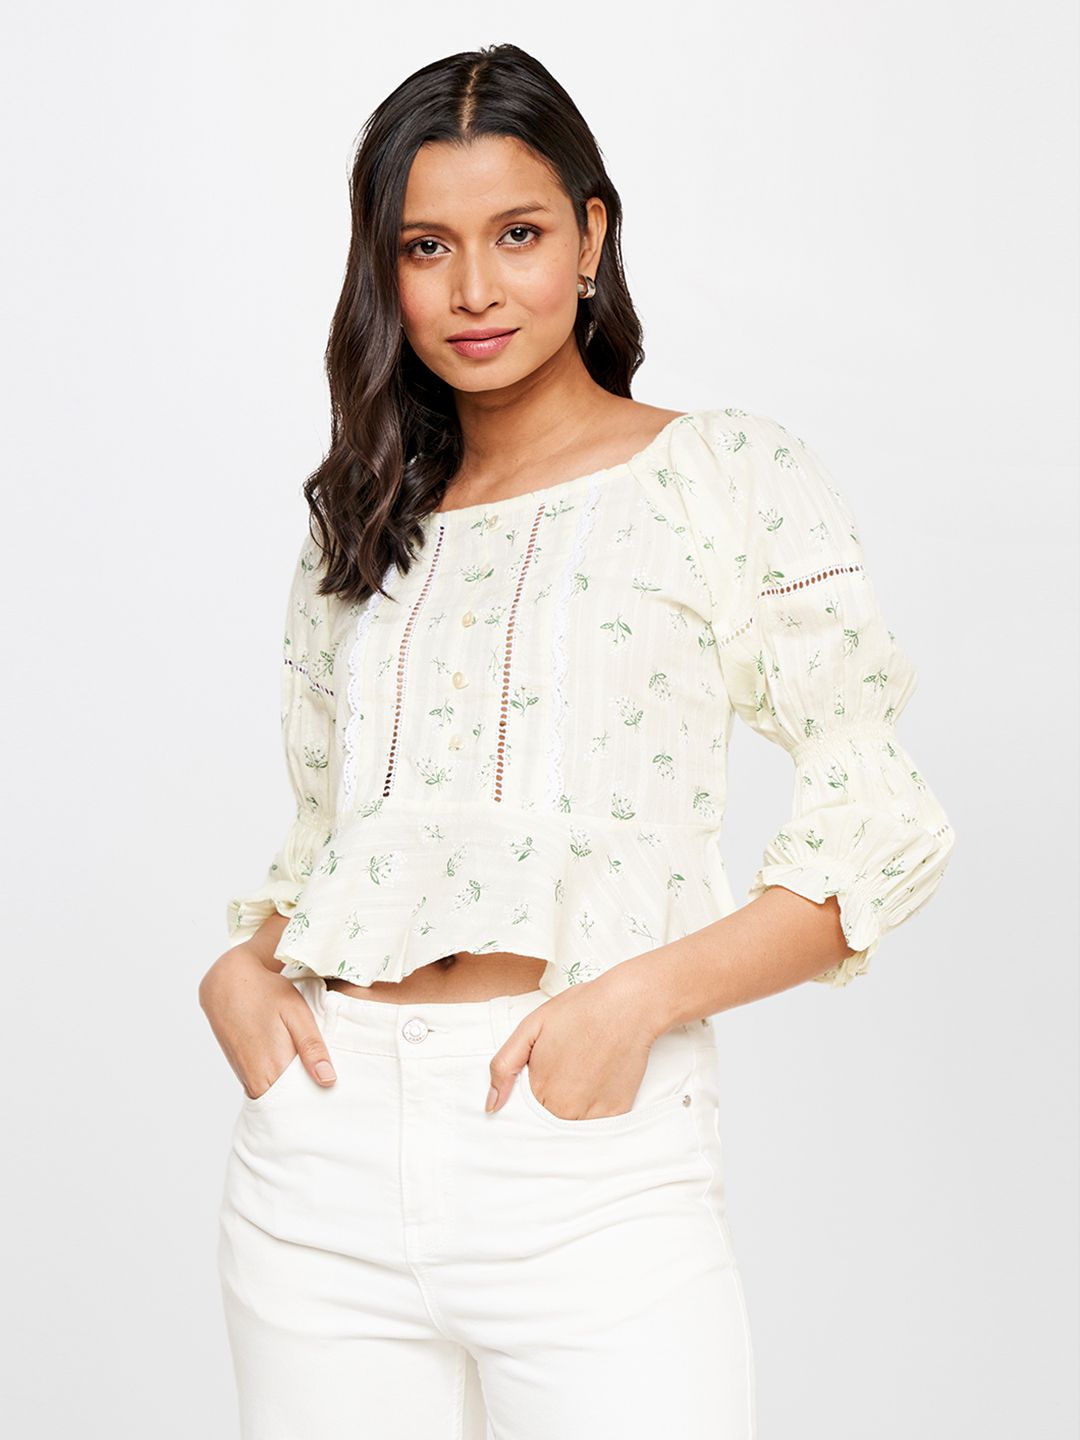 AND Floral Print Pure Cotton Cinched Waist Top Price in India